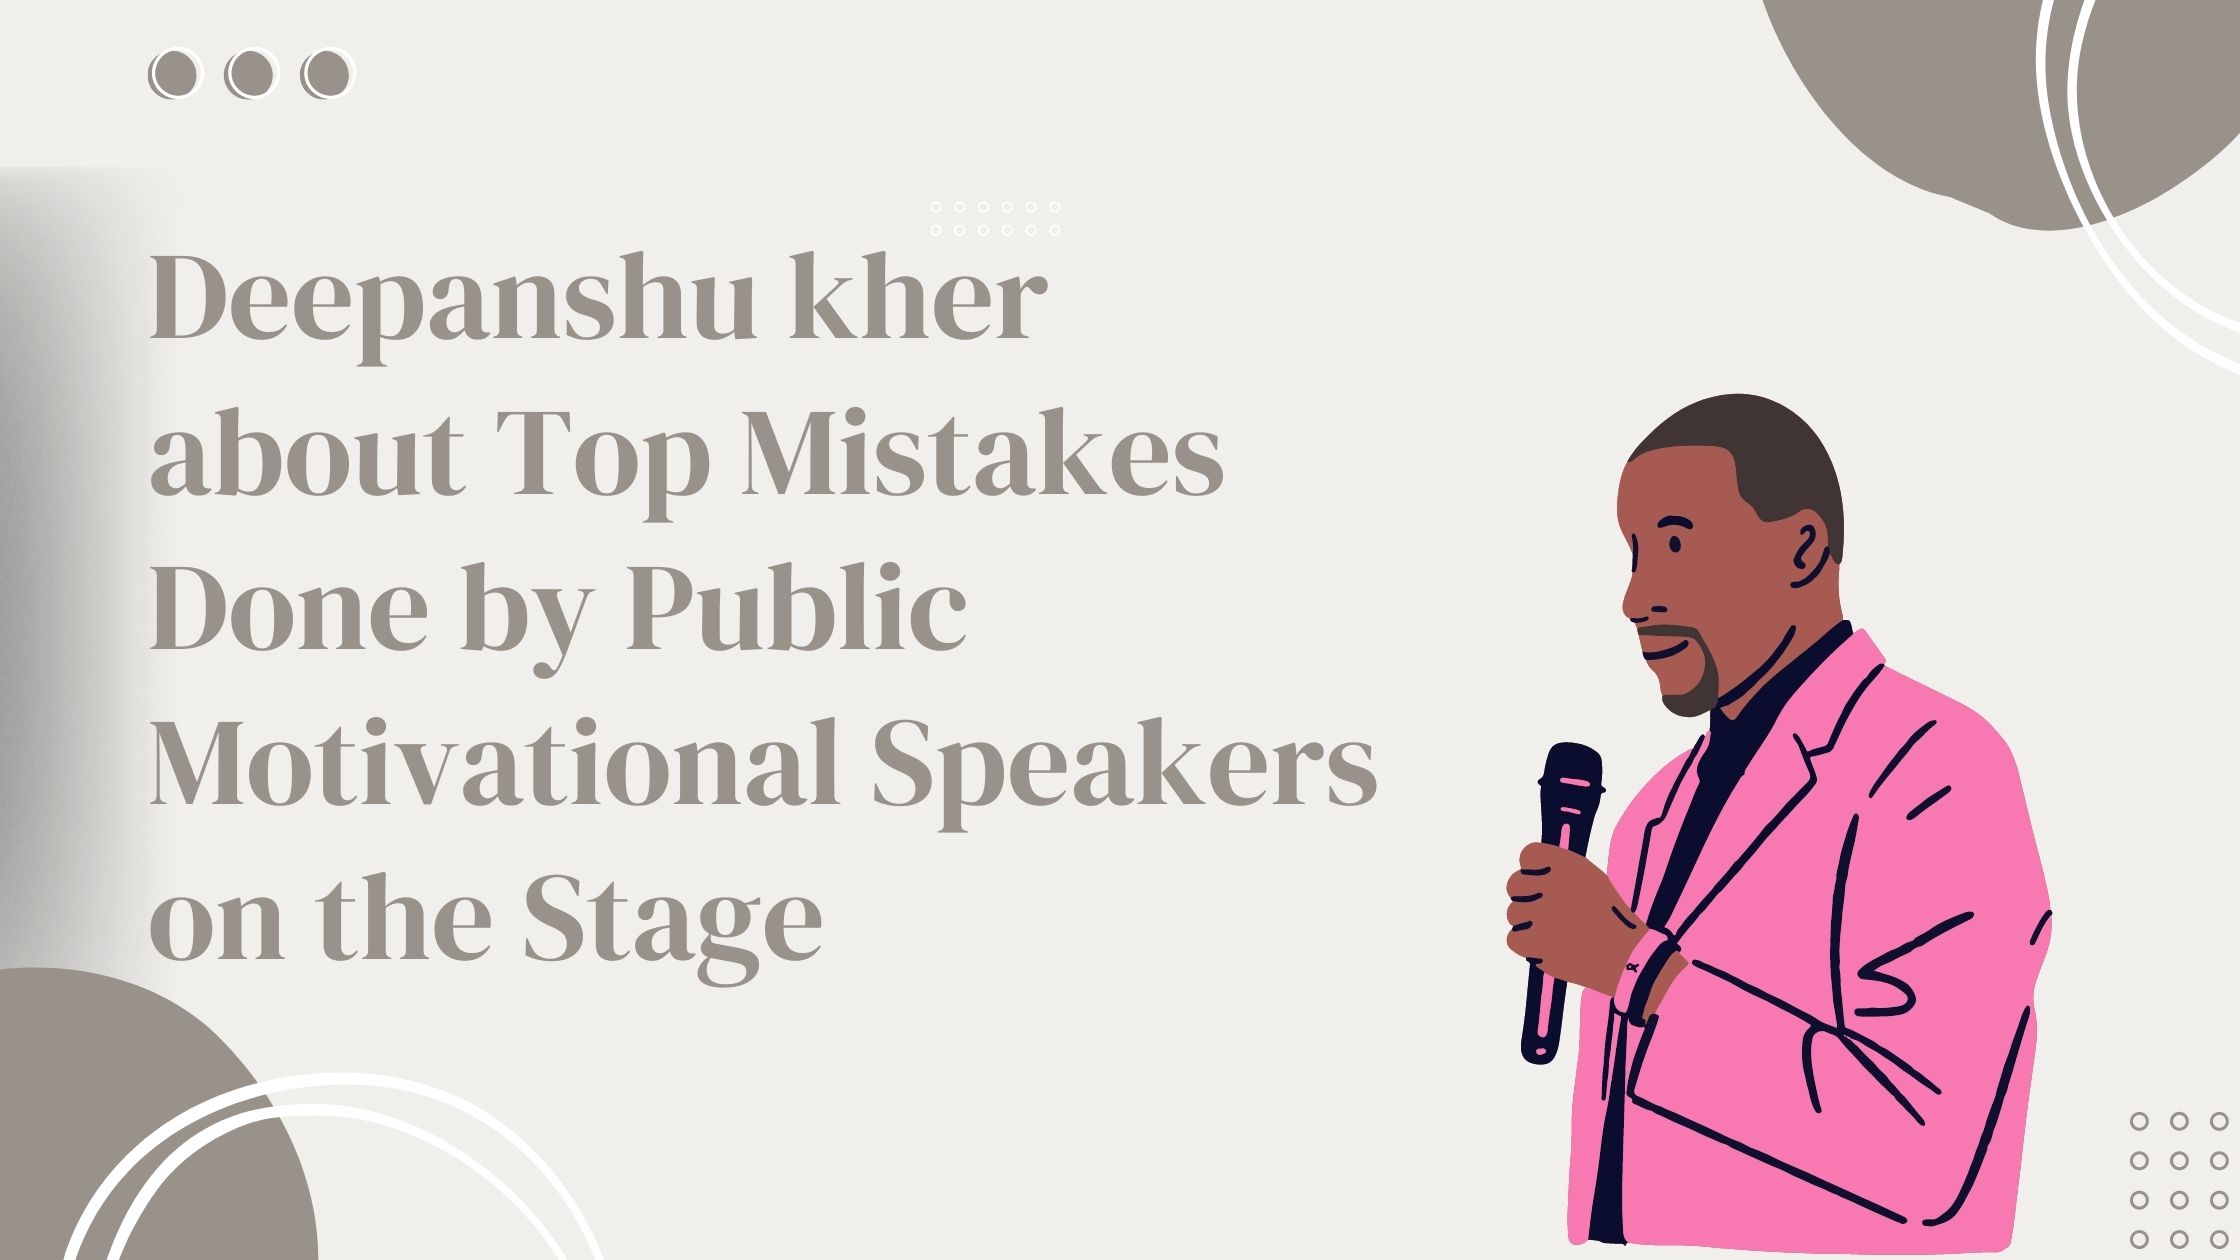 Deepanshu-kher-about-Top-Mistakes-Done-by-Public-Motivational-Speakers-on-the-Stage